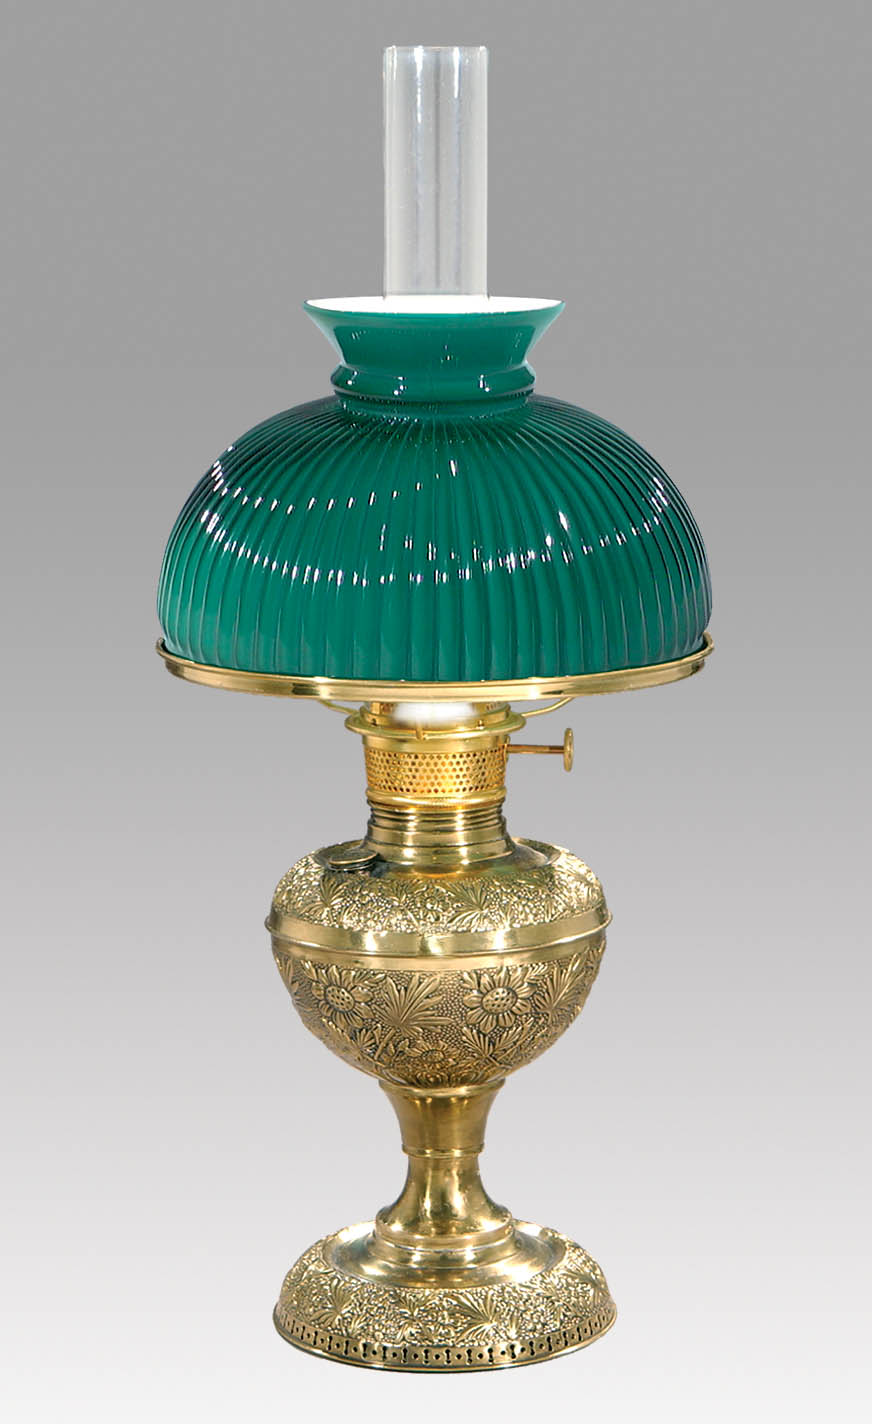 Early Style Embossed Brass Lamp 69044d, Early Electric Table Lamps